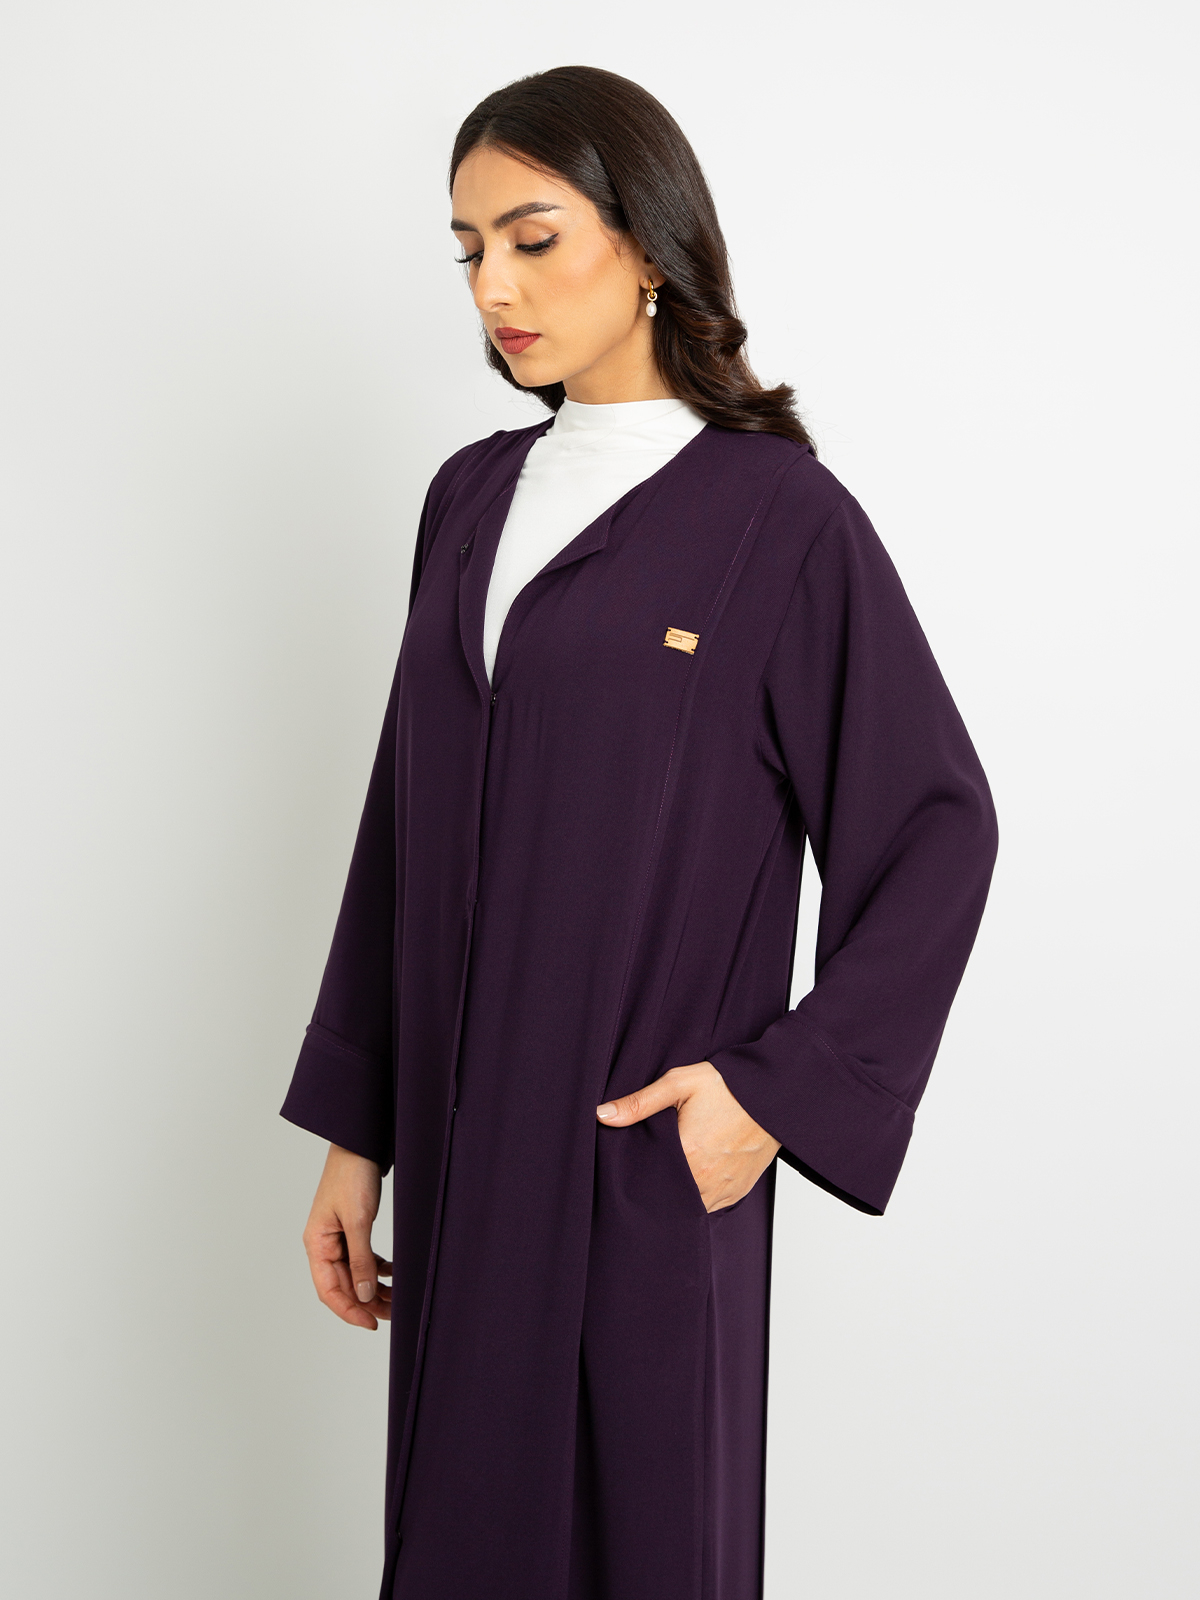 Mauve long closed practical abaya in high quality crepe fabric by kaafmeem for work and everyday wear 